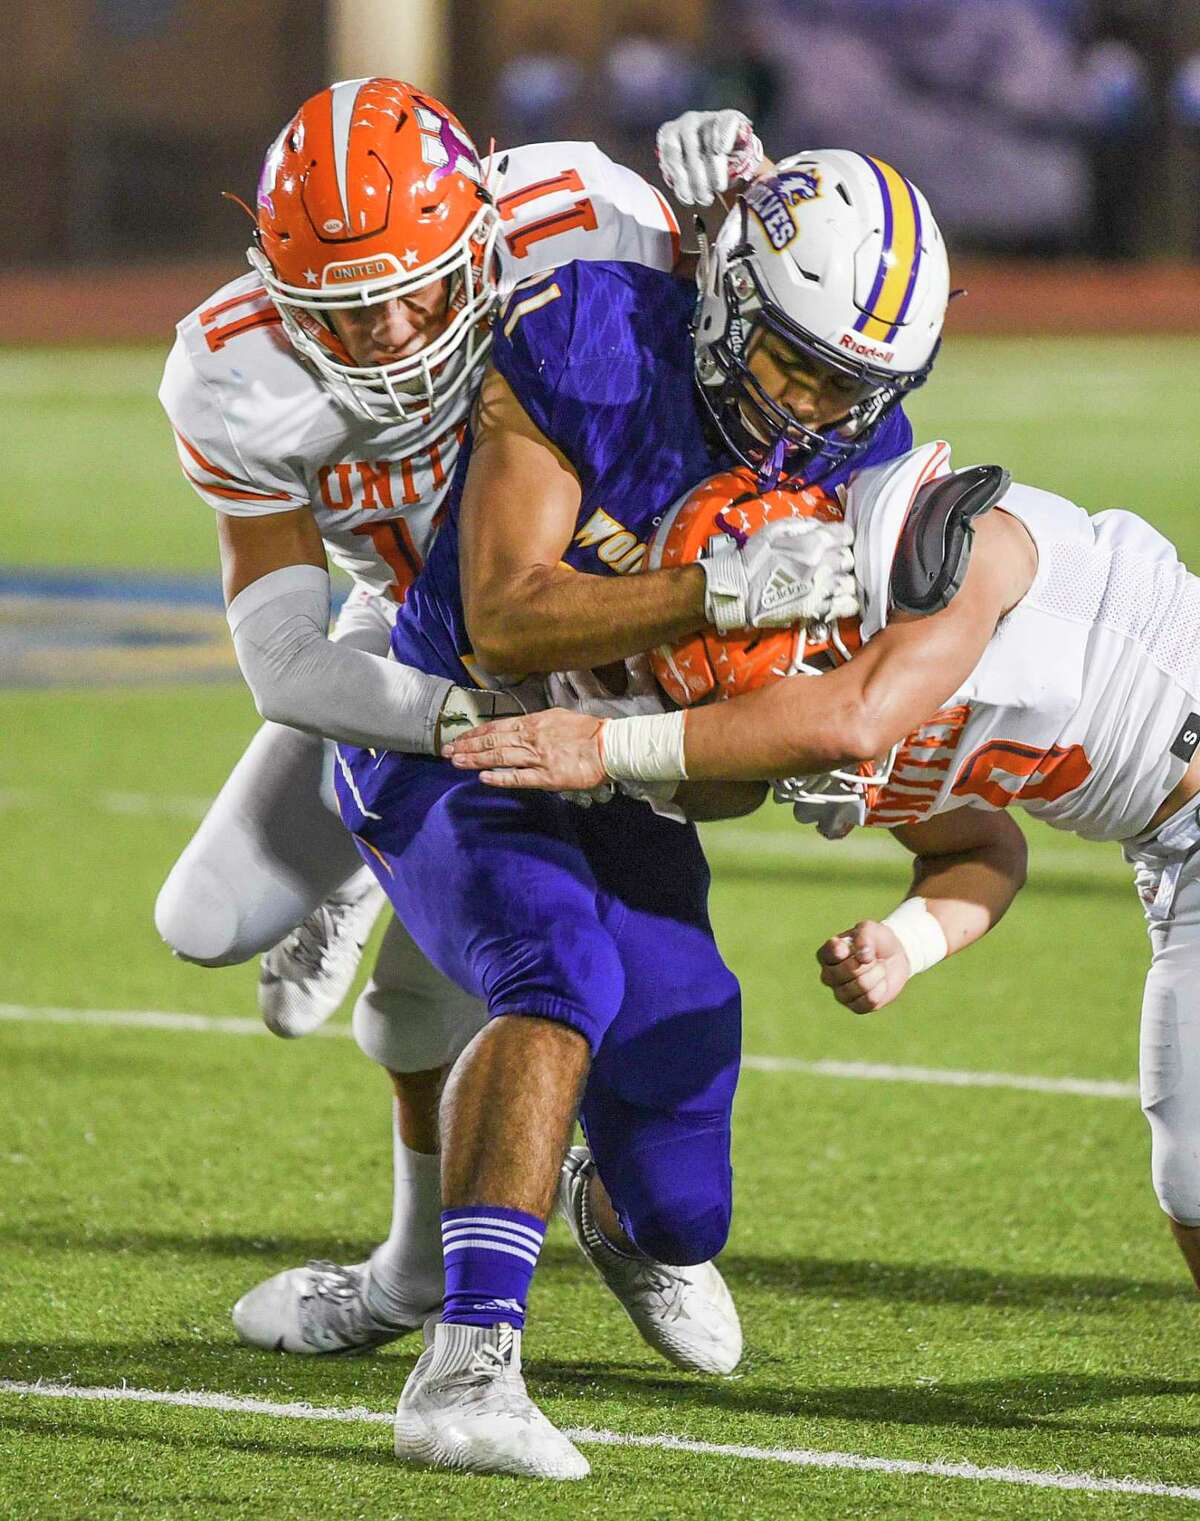 LBJ running back Manny Rodriguez finished with a season-high 73 yards on 12 carries.